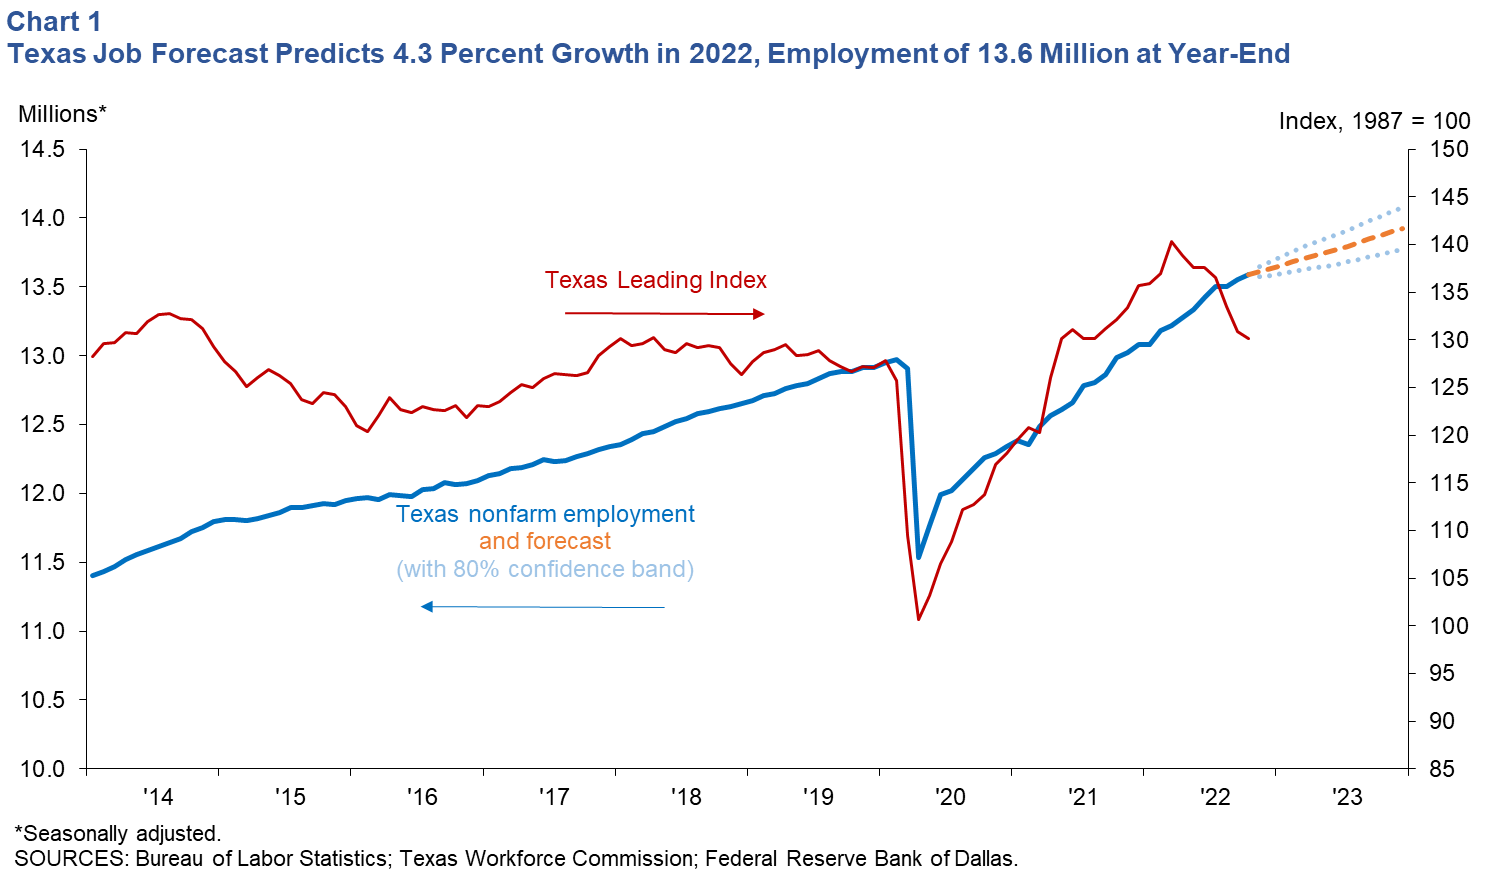 Texas Job Forecast Predicts 4.3 Percent Growth in 2022, Employment of 13.6 Million at Year-End